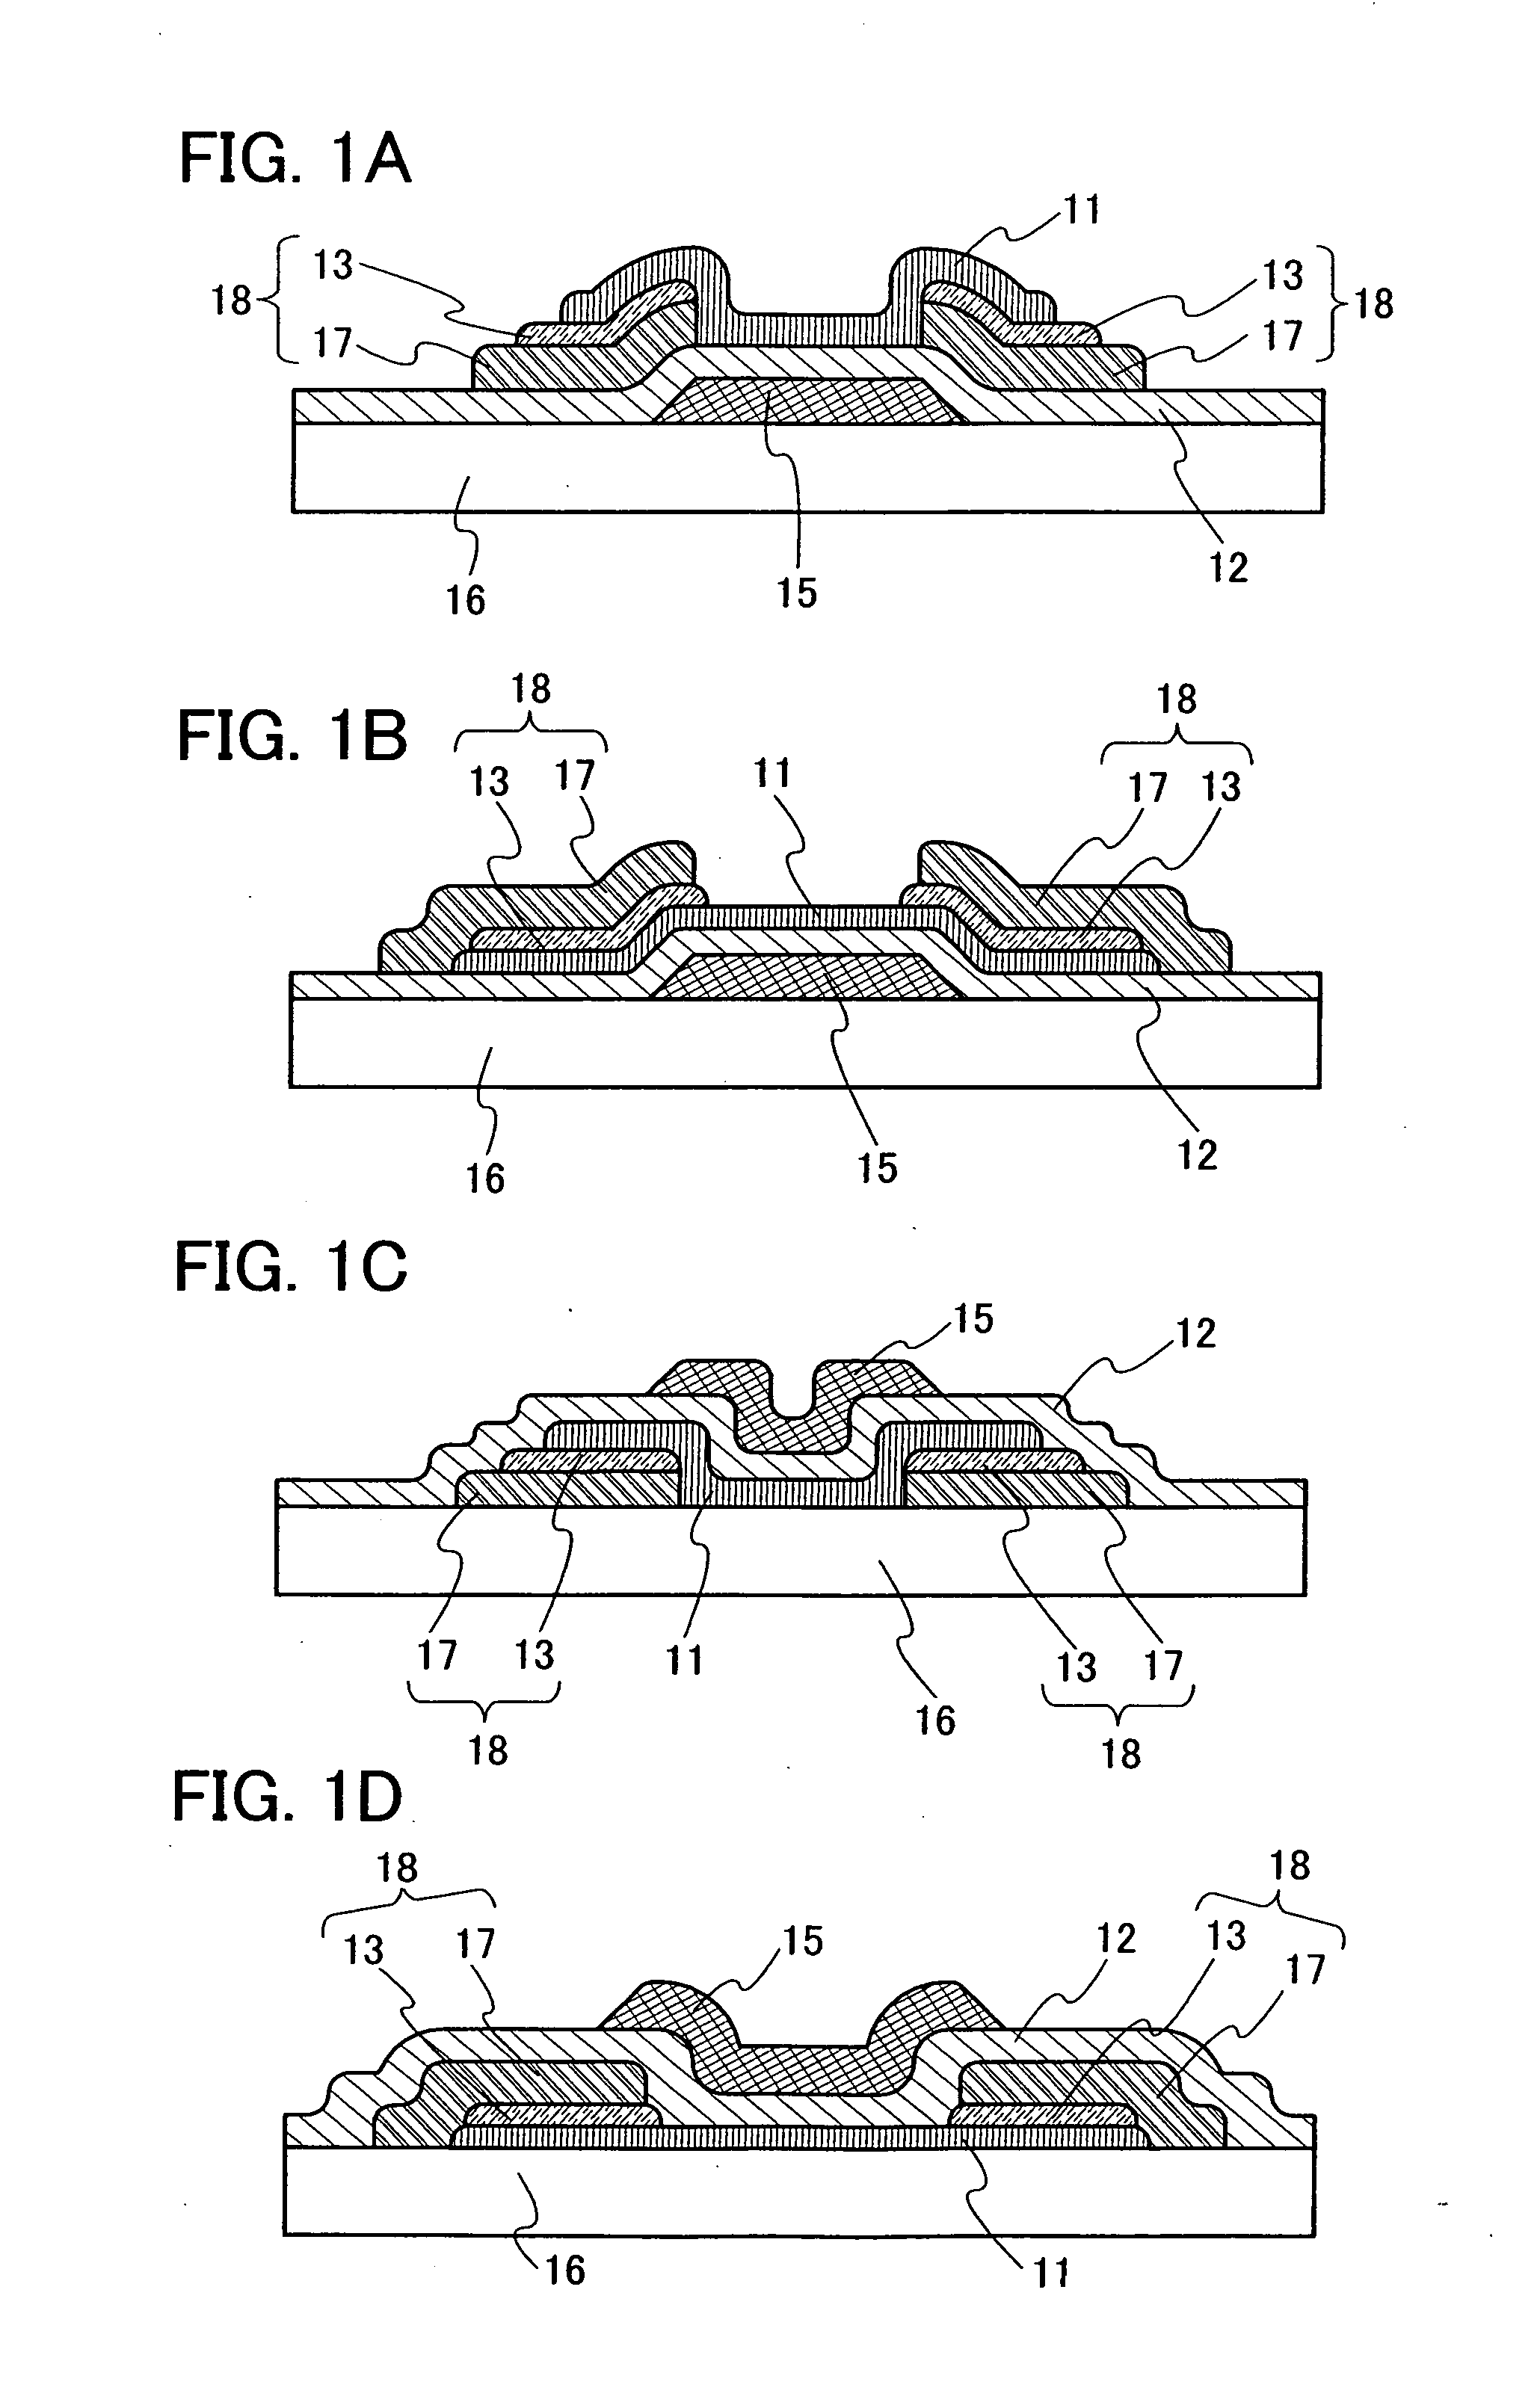 Organic field effect transistor and semiconductor device